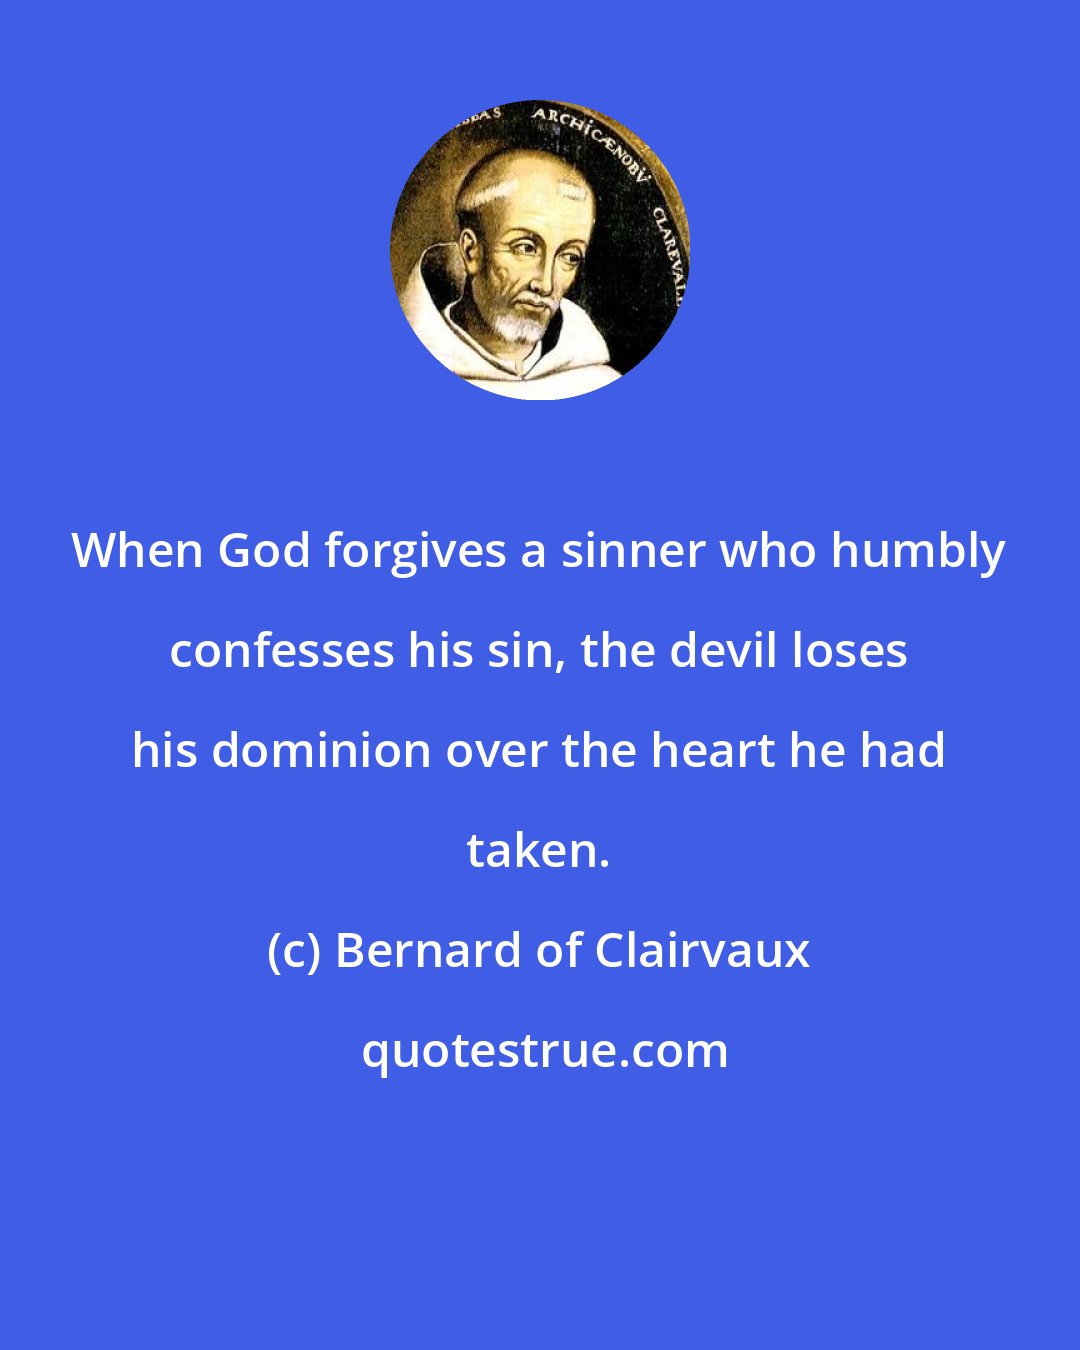 Bernard of Clairvaux: When God forgives a sinner who humbly confesses his sin, the devil loses his dominion over the heart he had taken.